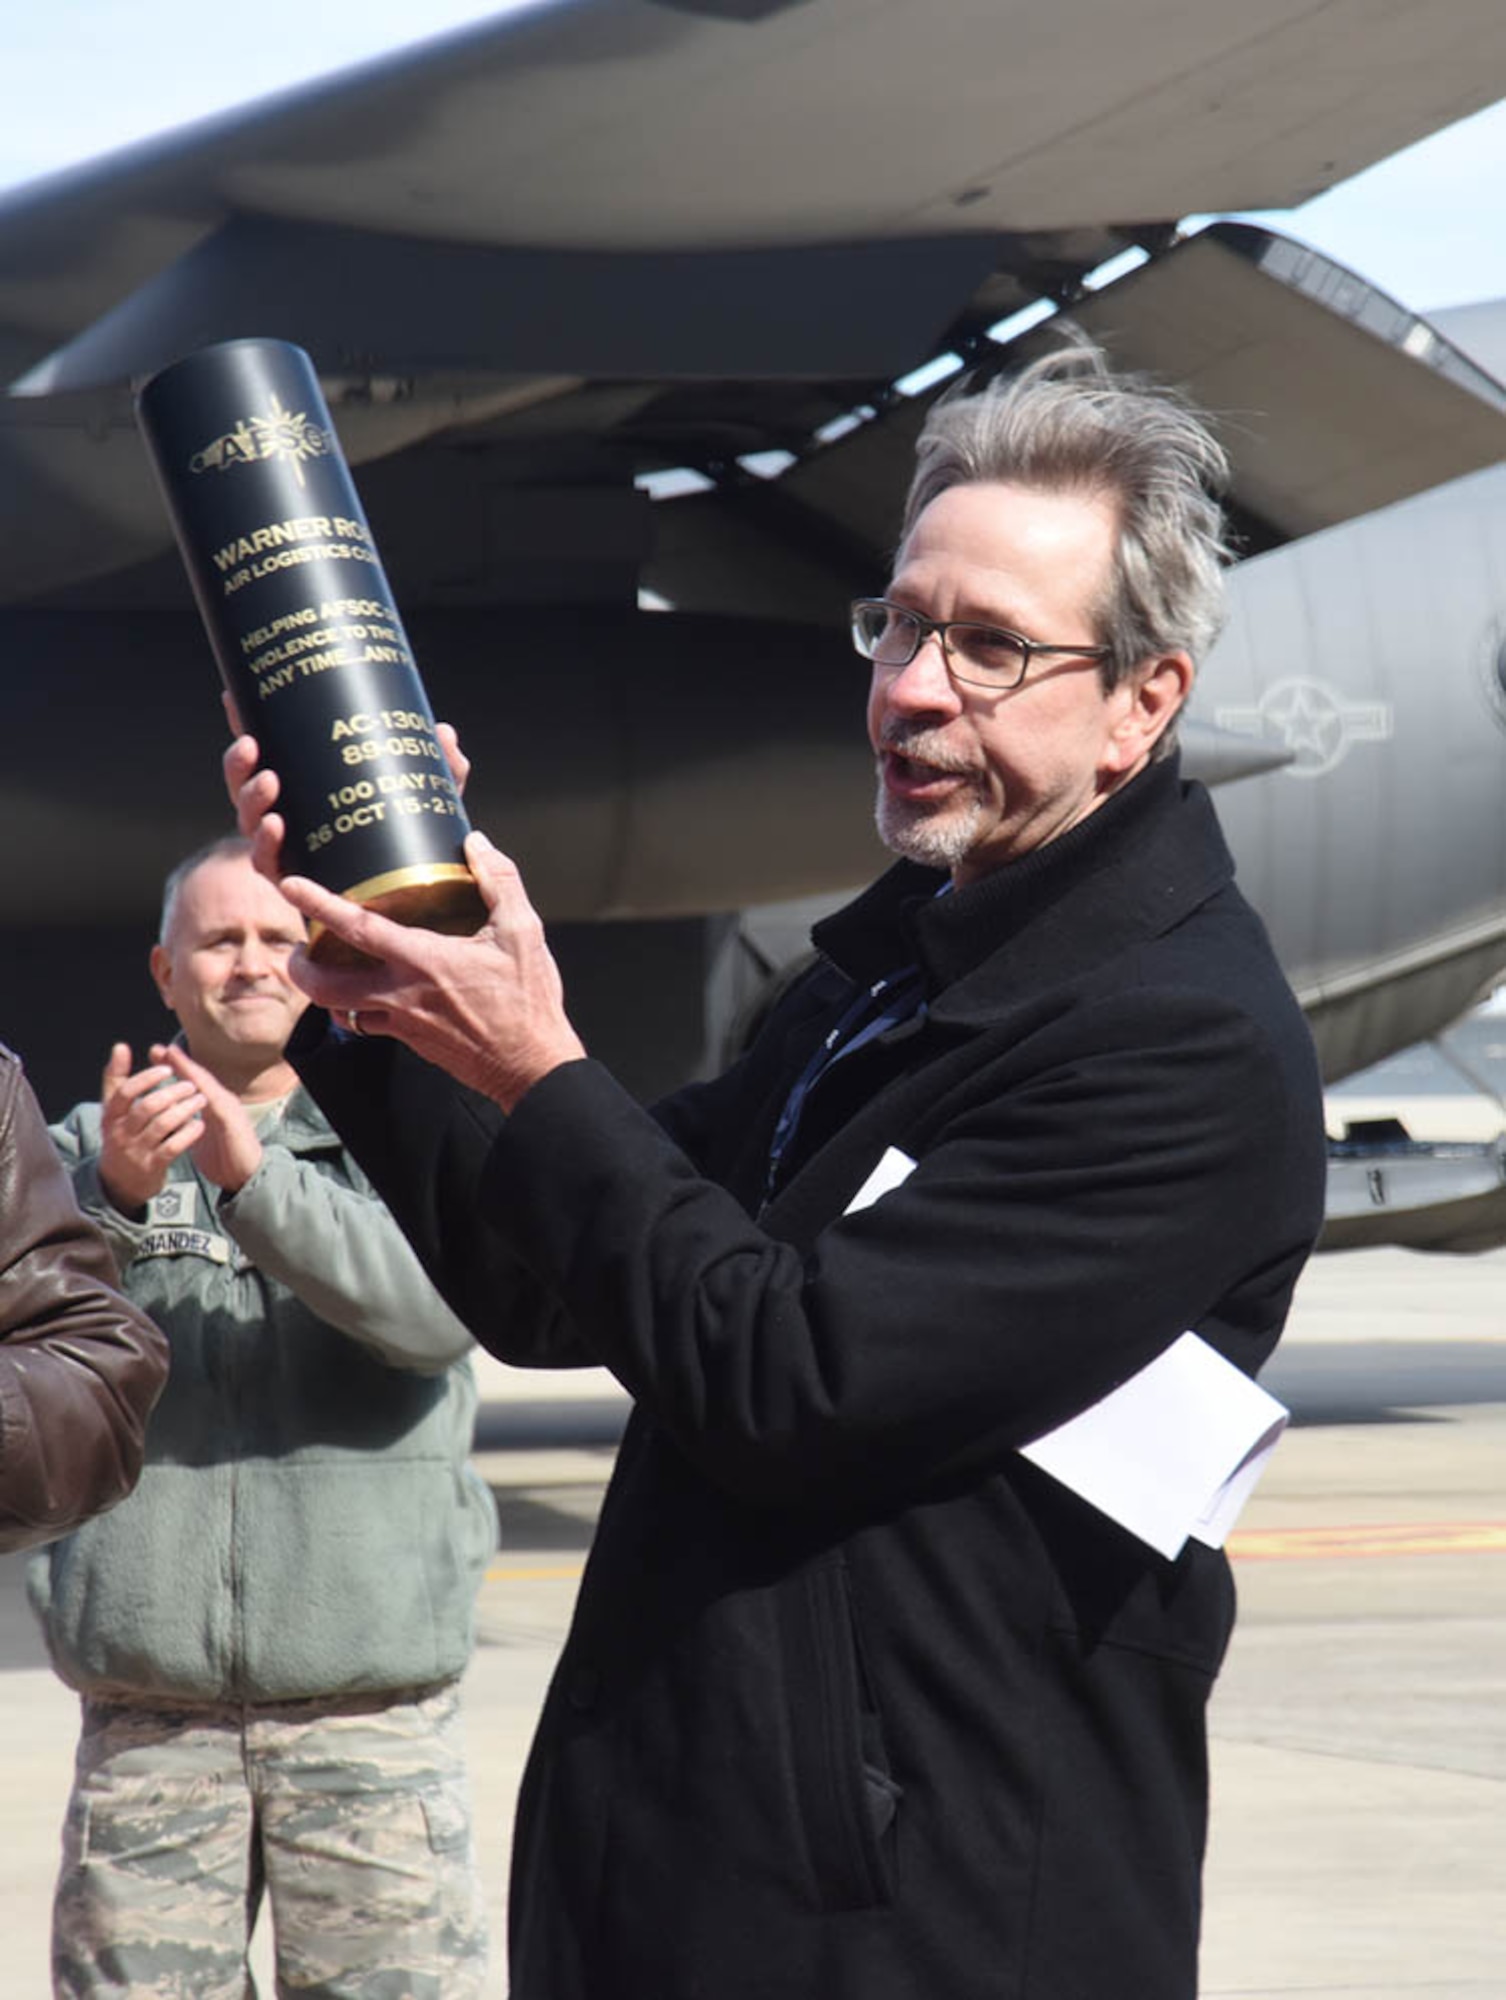 Doug Keene, WR-ALC  special assistant to the commander, holds up a 105mm round presented to the Warner Robins Air Logistics Complex from Maj. Gen. Haase on behalf of the 19,000 men and women who make up Air Force Special Operations Command. Haase was here to thank the workforce for the expedited work done on Special Ops aircraft over the course of the last year. (U.S. Air Force photo by Ed Aspera) 